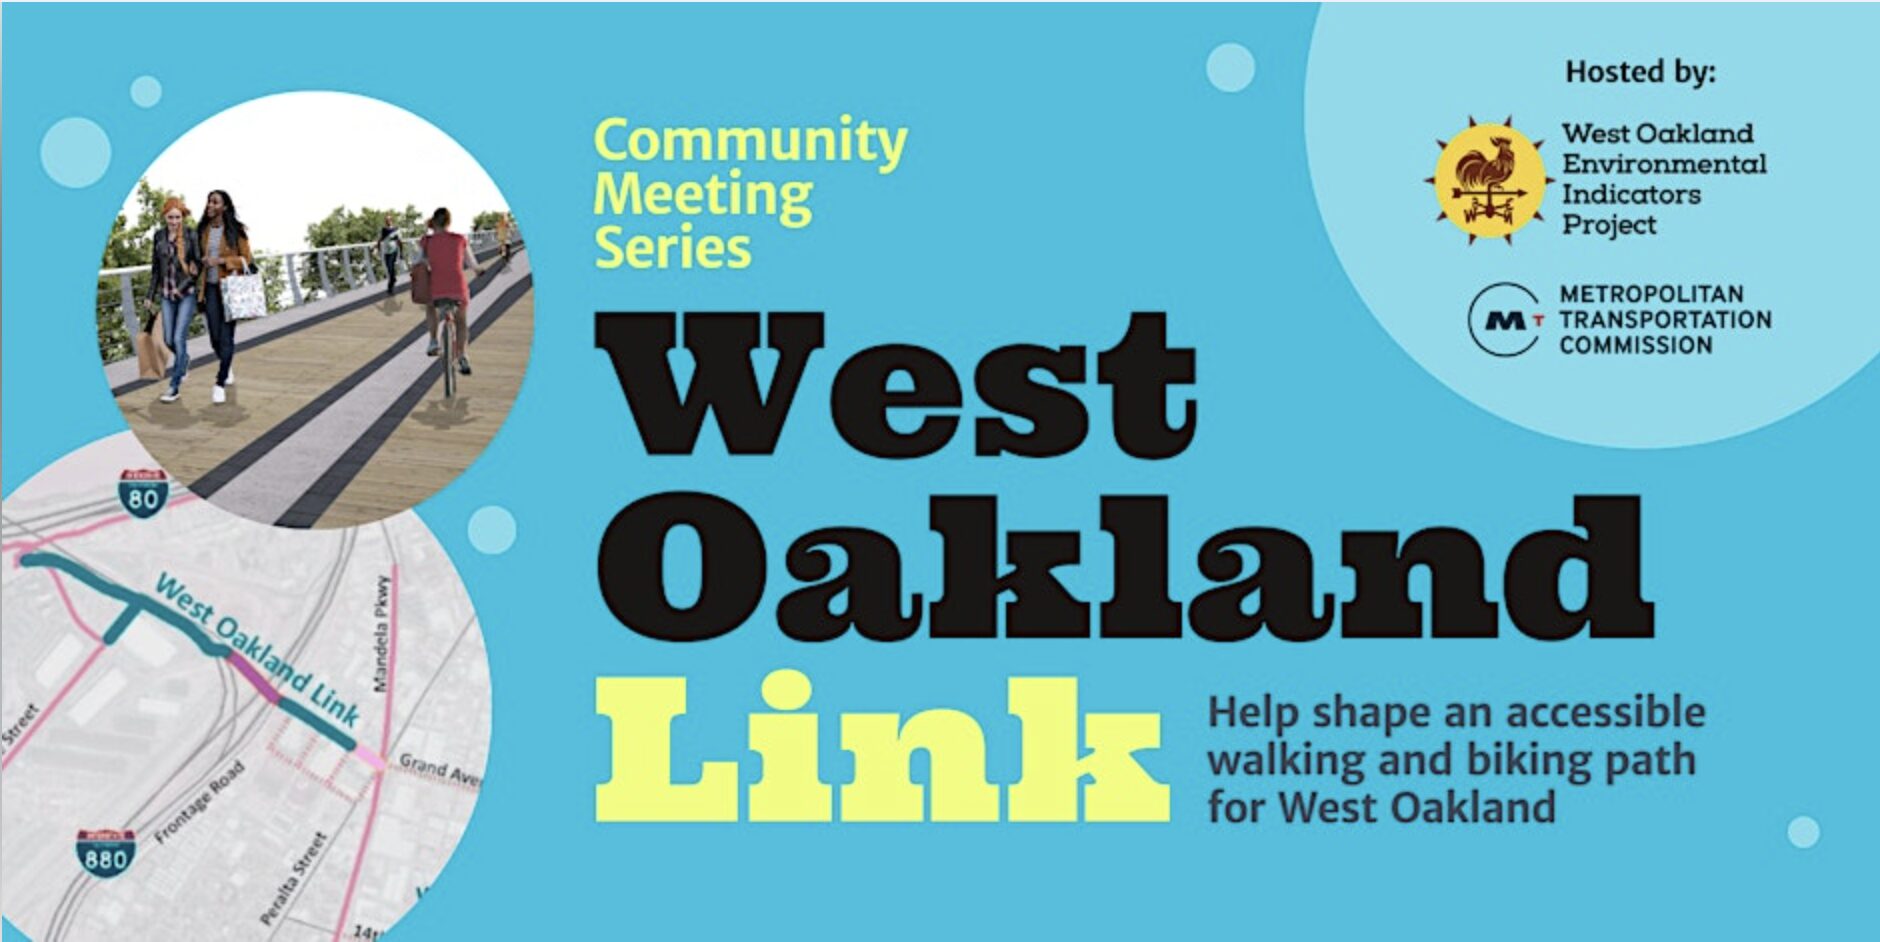 Light blue/green background with images of people walking and biking and an image of a map. Flier reads: Community Meeting Series. West Oakland Link. Help shape an accessible walking and biking path for West Oakland. Hosted by West Oakland Environmental Indicators Project and METROPOLITAN TRANSPORTATION COMMISSION